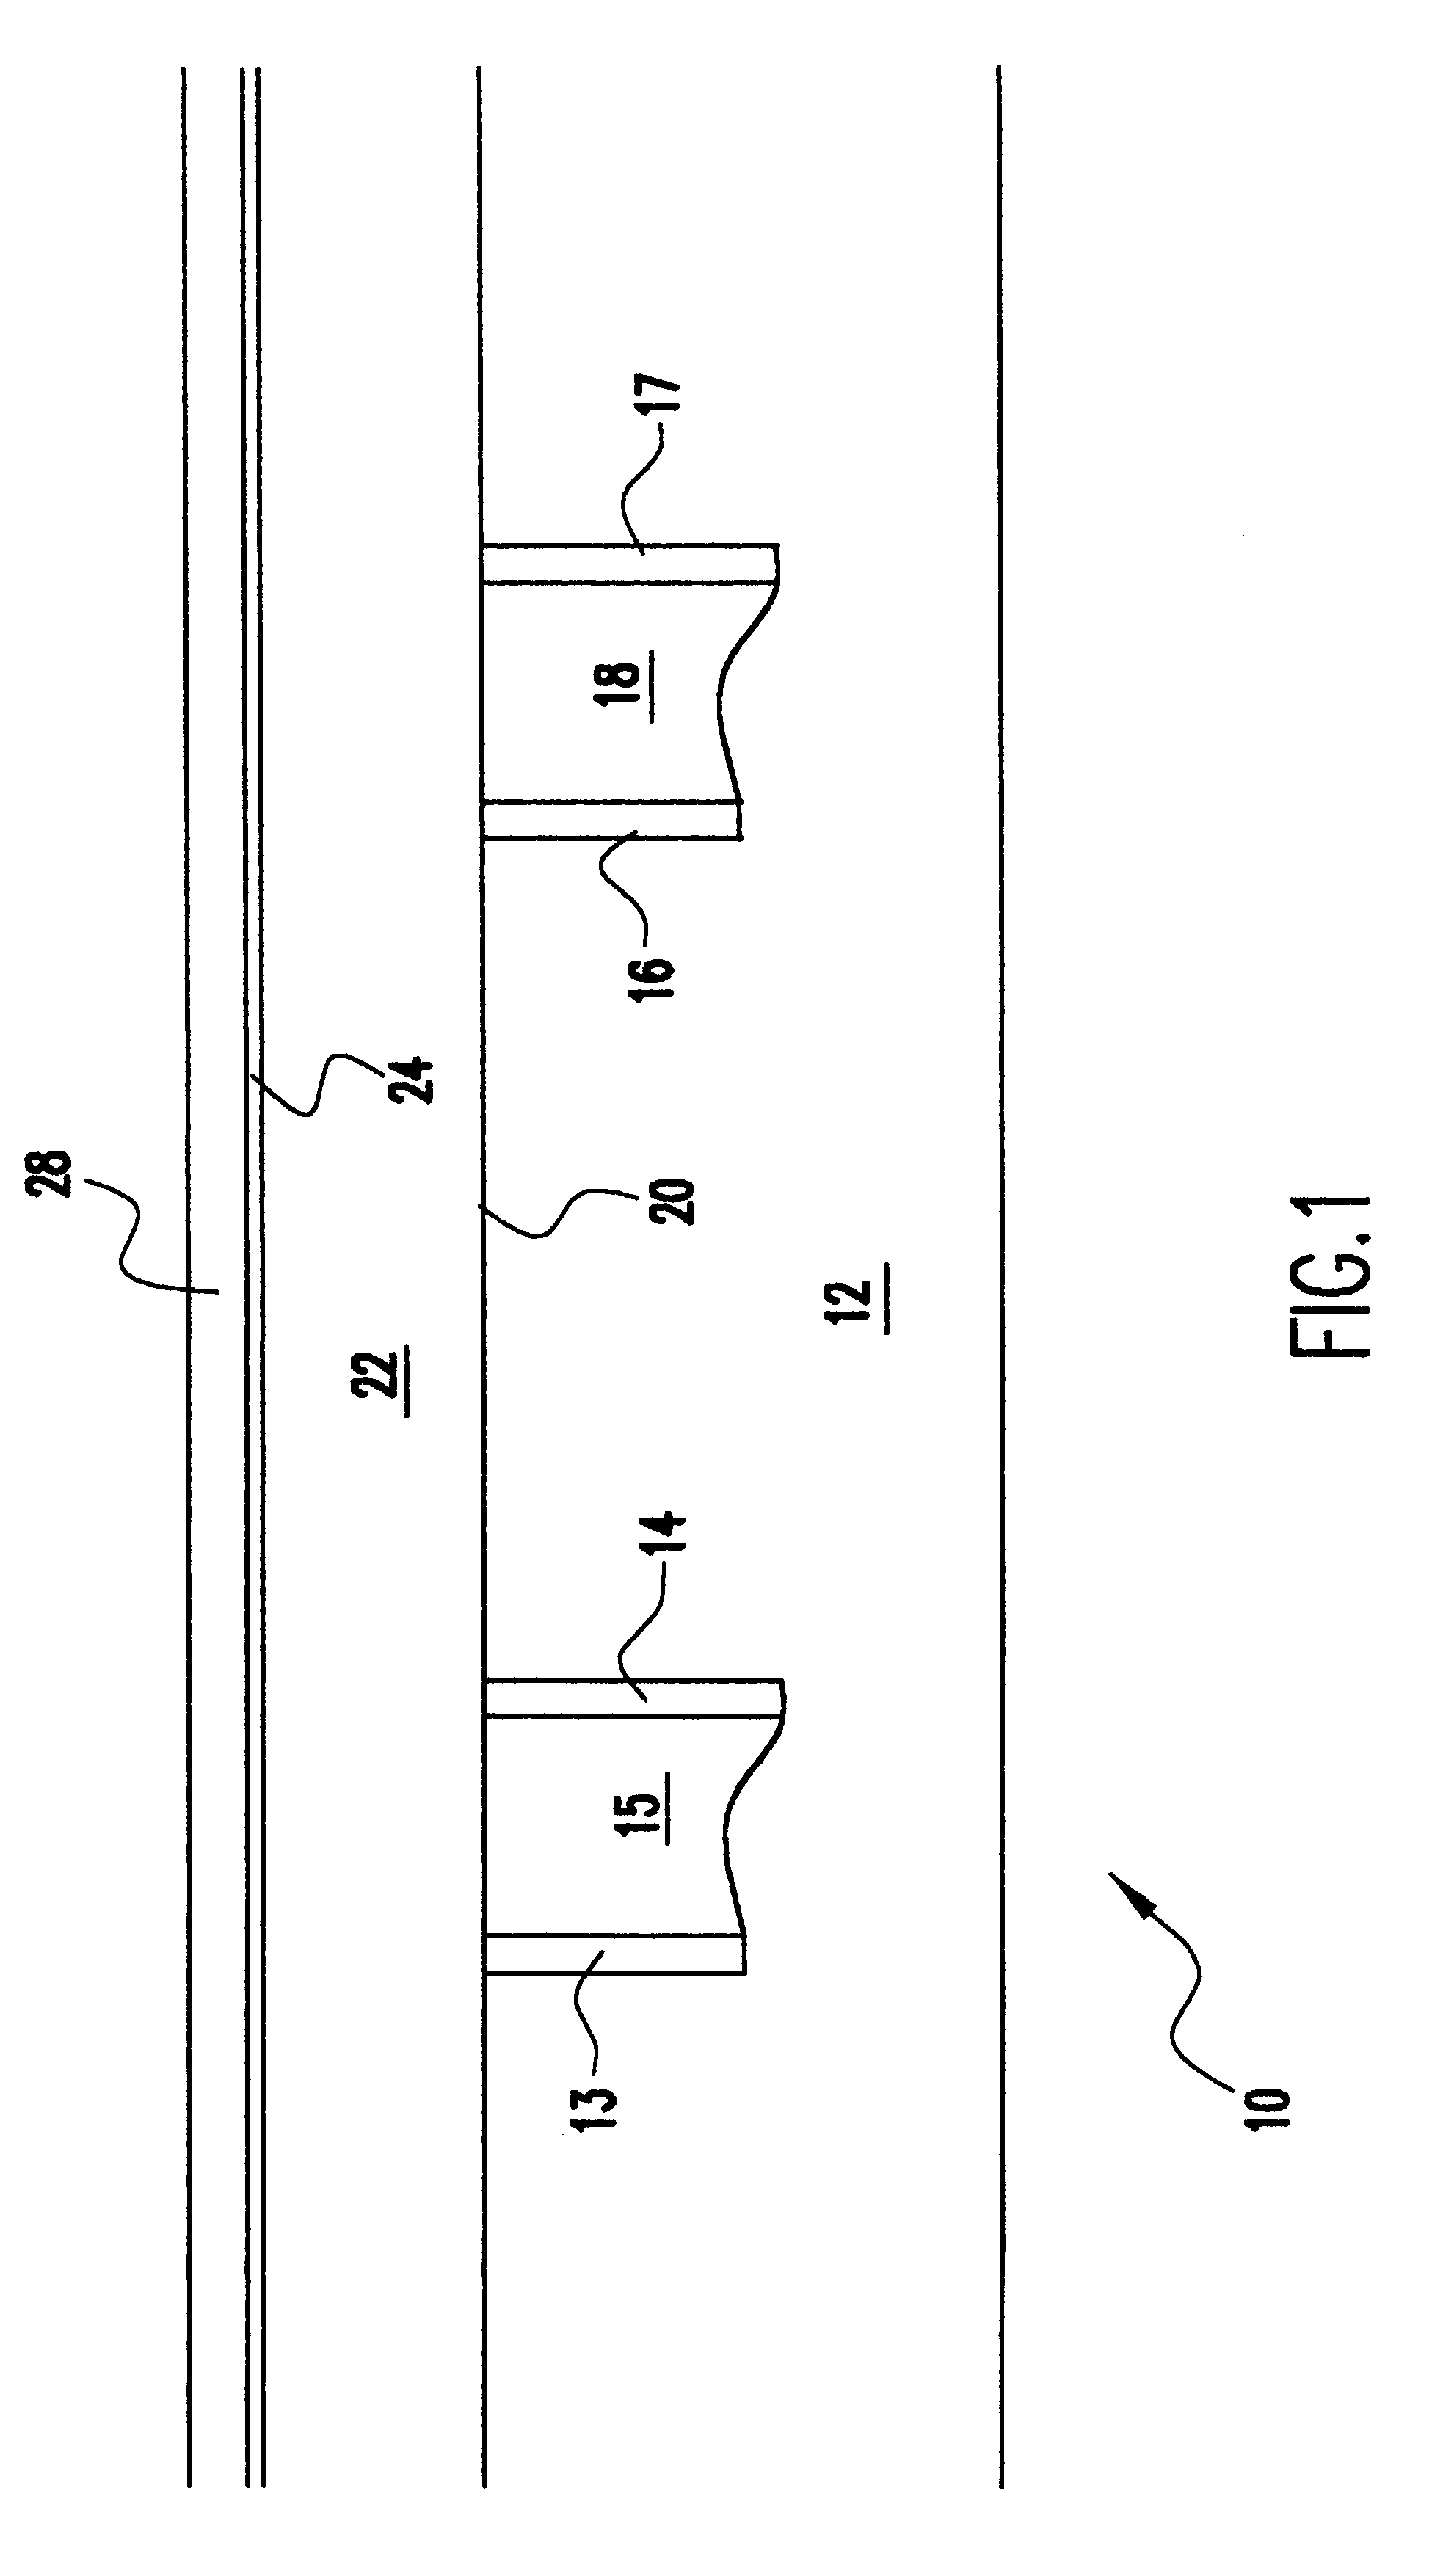 Dual damascene flowable oxide insulation structure and metallic barrier